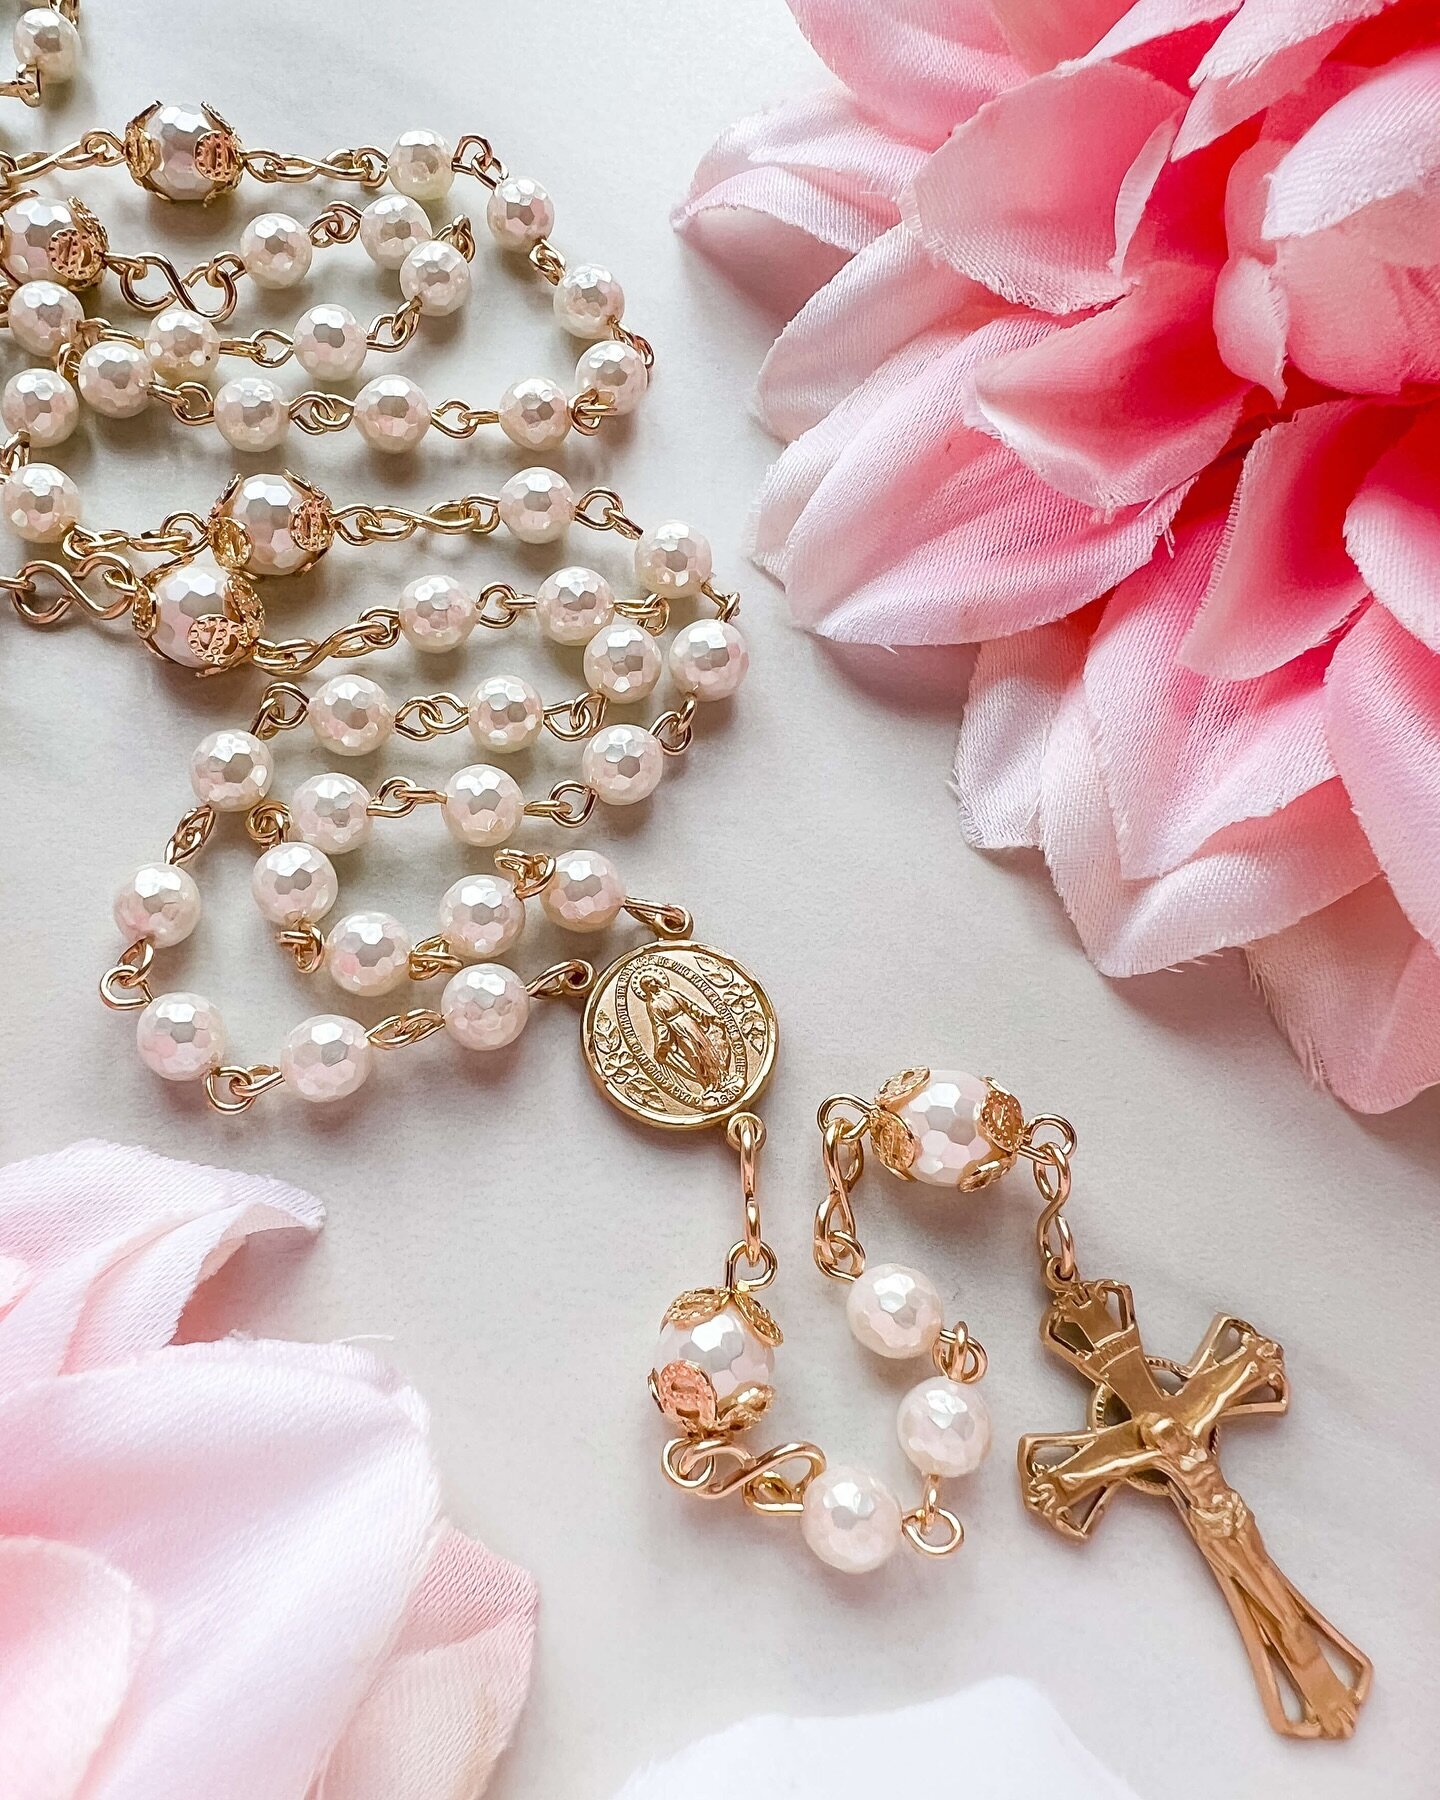 Shell pearl bridal rosary with round Miraculous Medal center and tulip bead caps 💛

Enjoy a discount on all orders with code LENT24 at checkout! 
#livolsirosaries #rosary #customrosary #catholic #traditionalcatholic #catholicbride #catholicwedding #